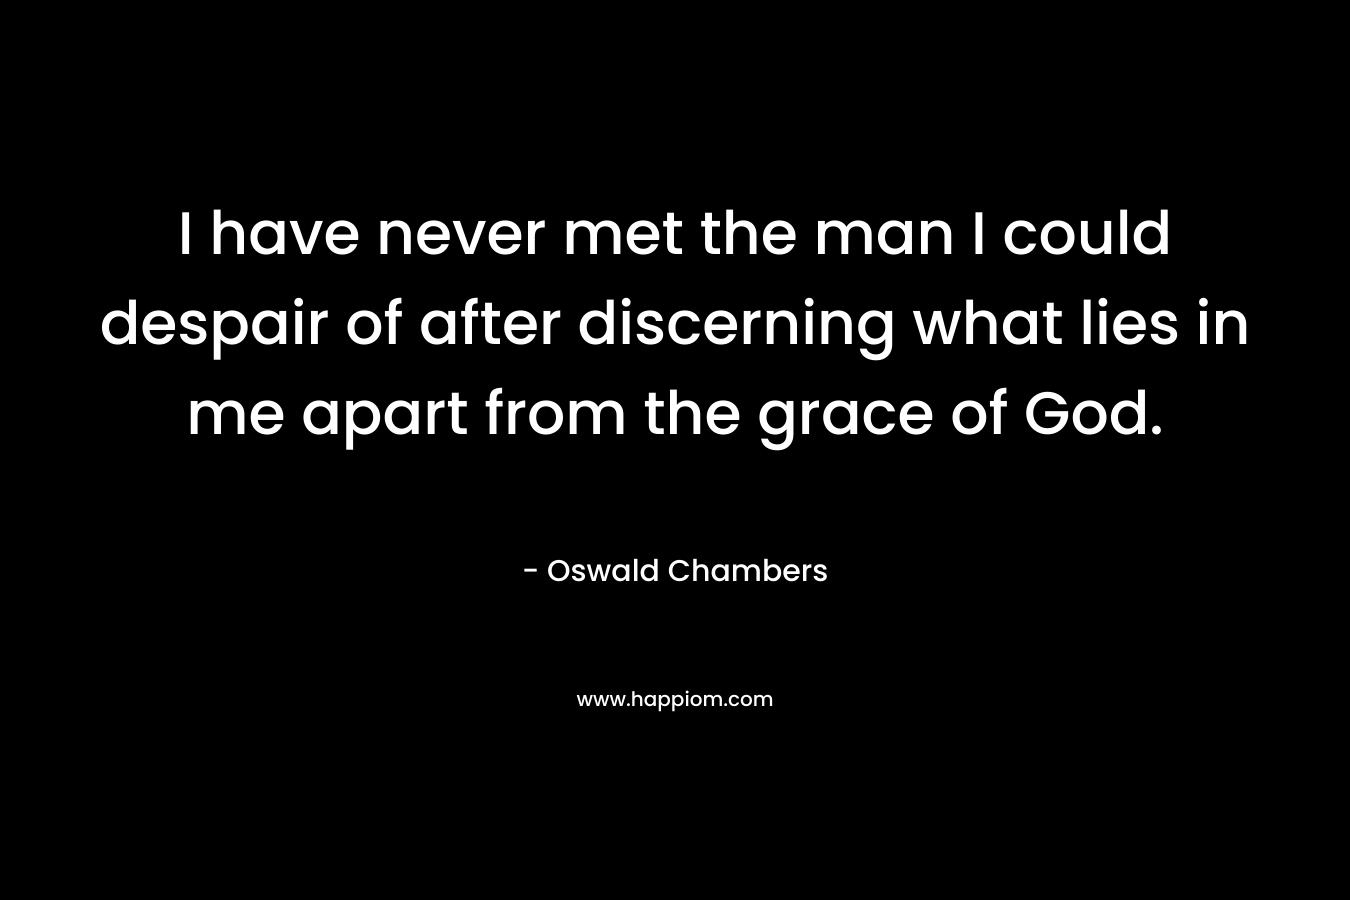 I have never met the man I could despair of after discerning what lies in me apart from the grace of God.